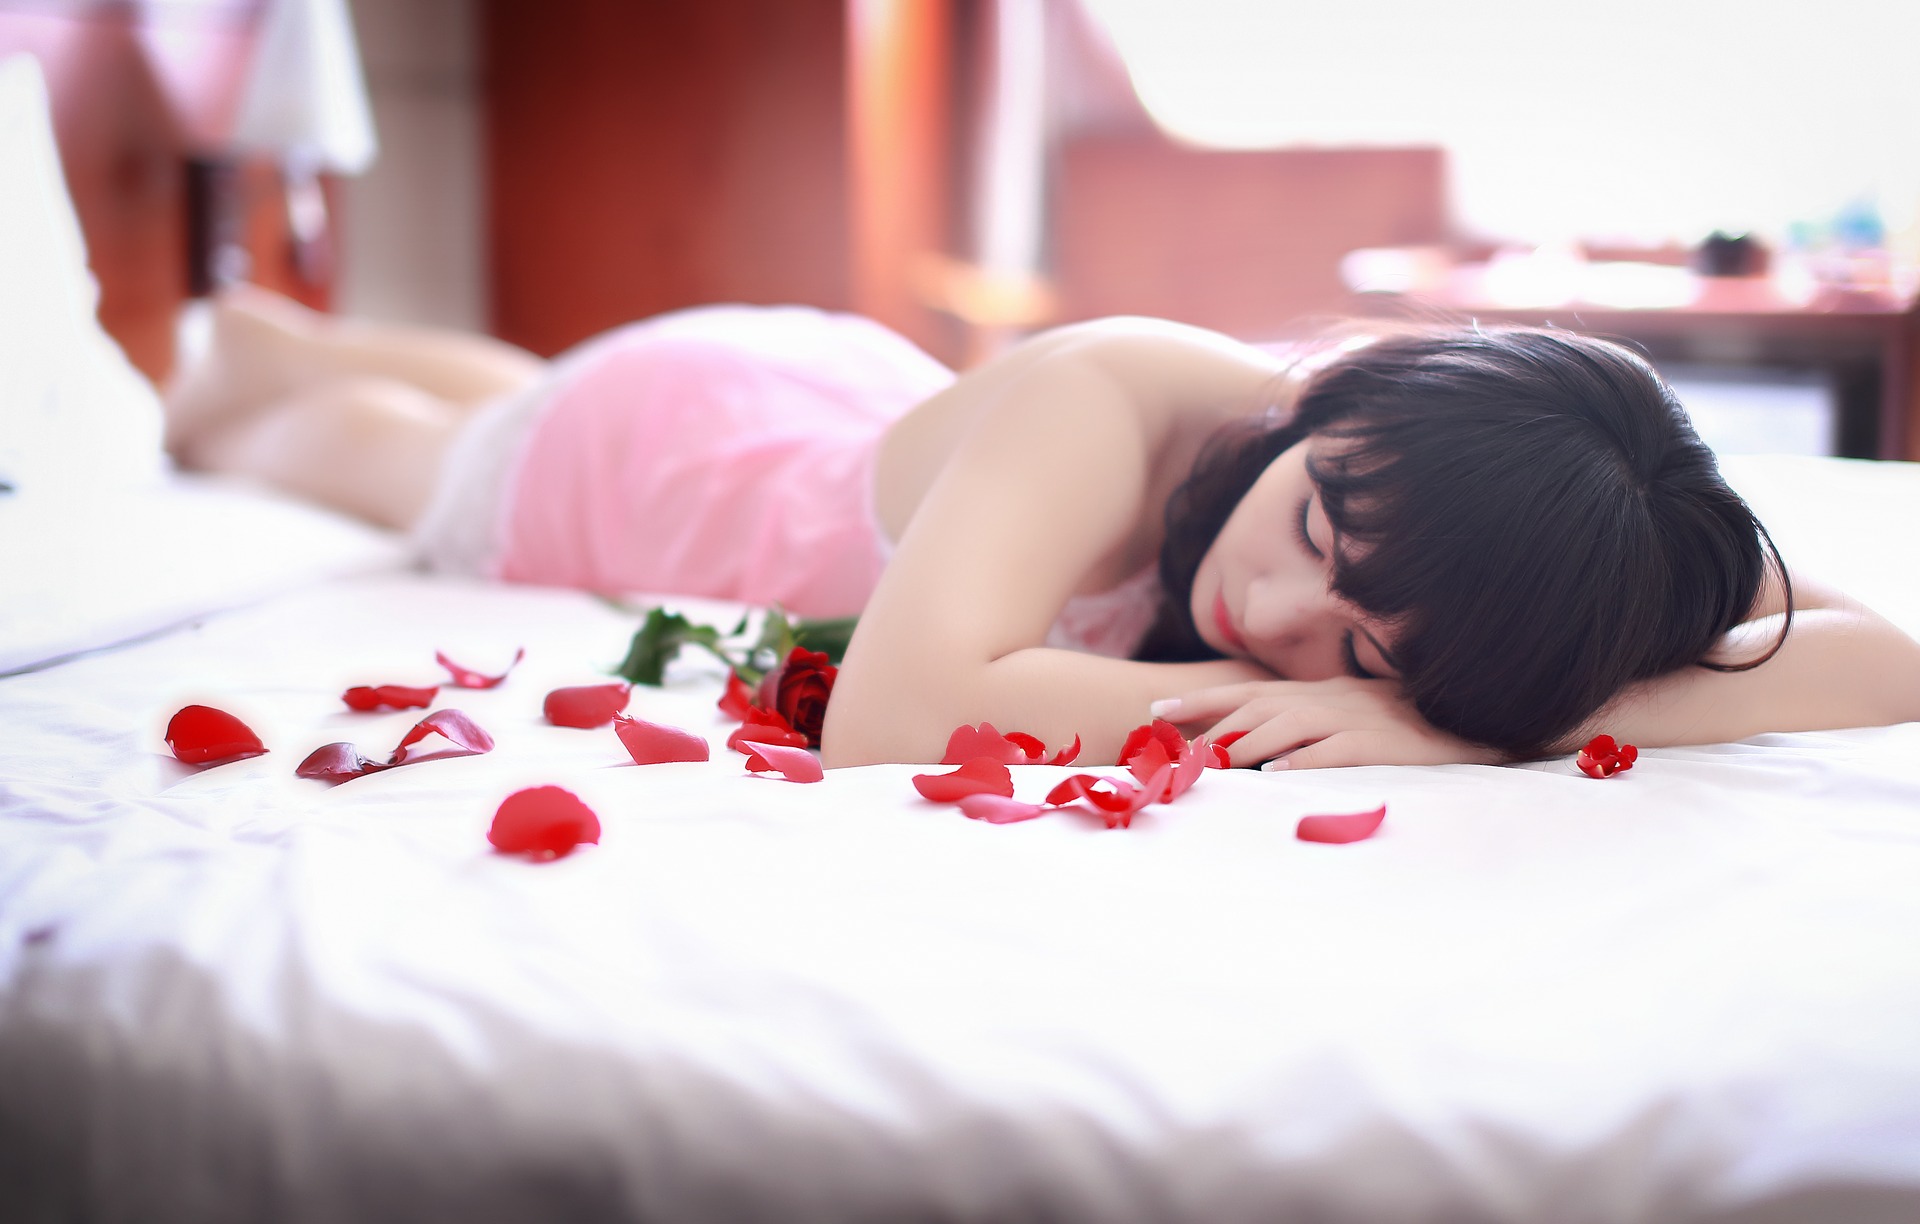 Sad woman in bed with rose petals sleeping